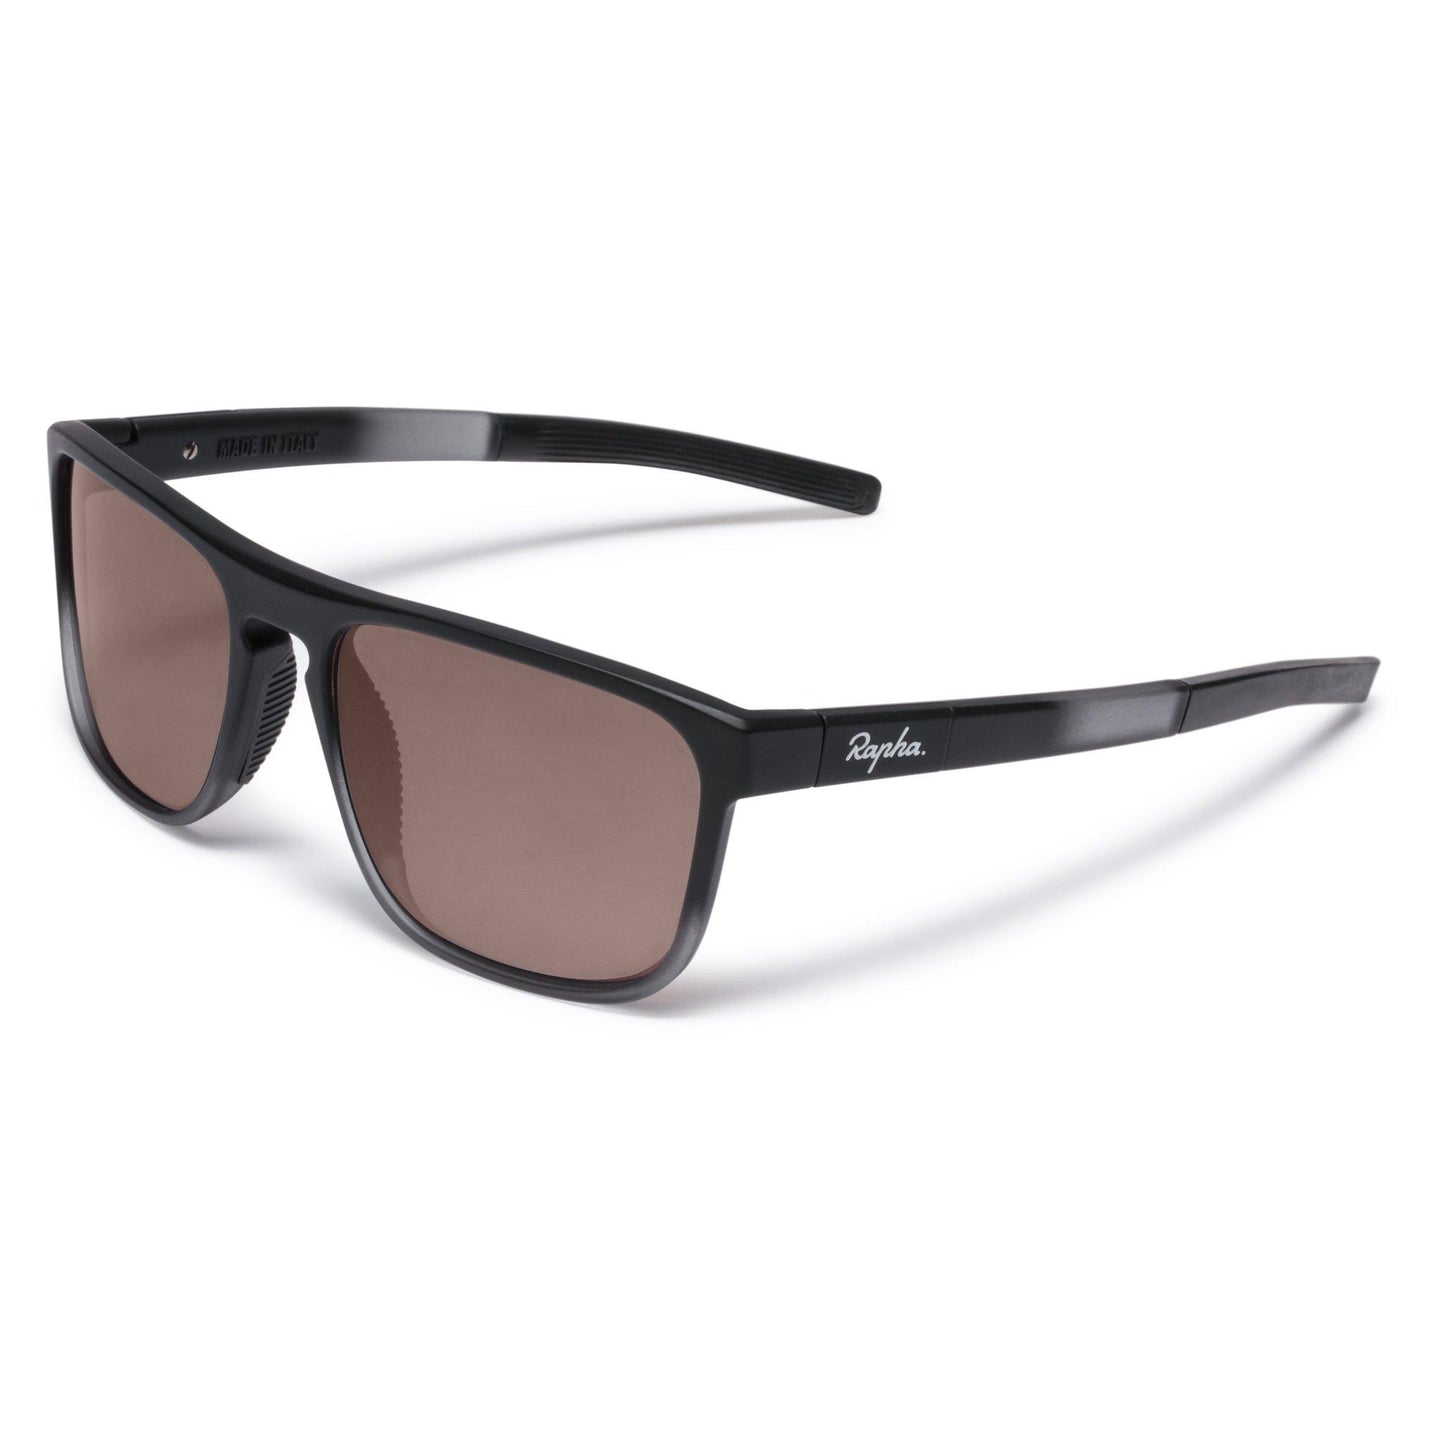 Rapha Classic Sunglasses Black/Black Mirror Lens buy online at Woolys Wheels and get free delivery